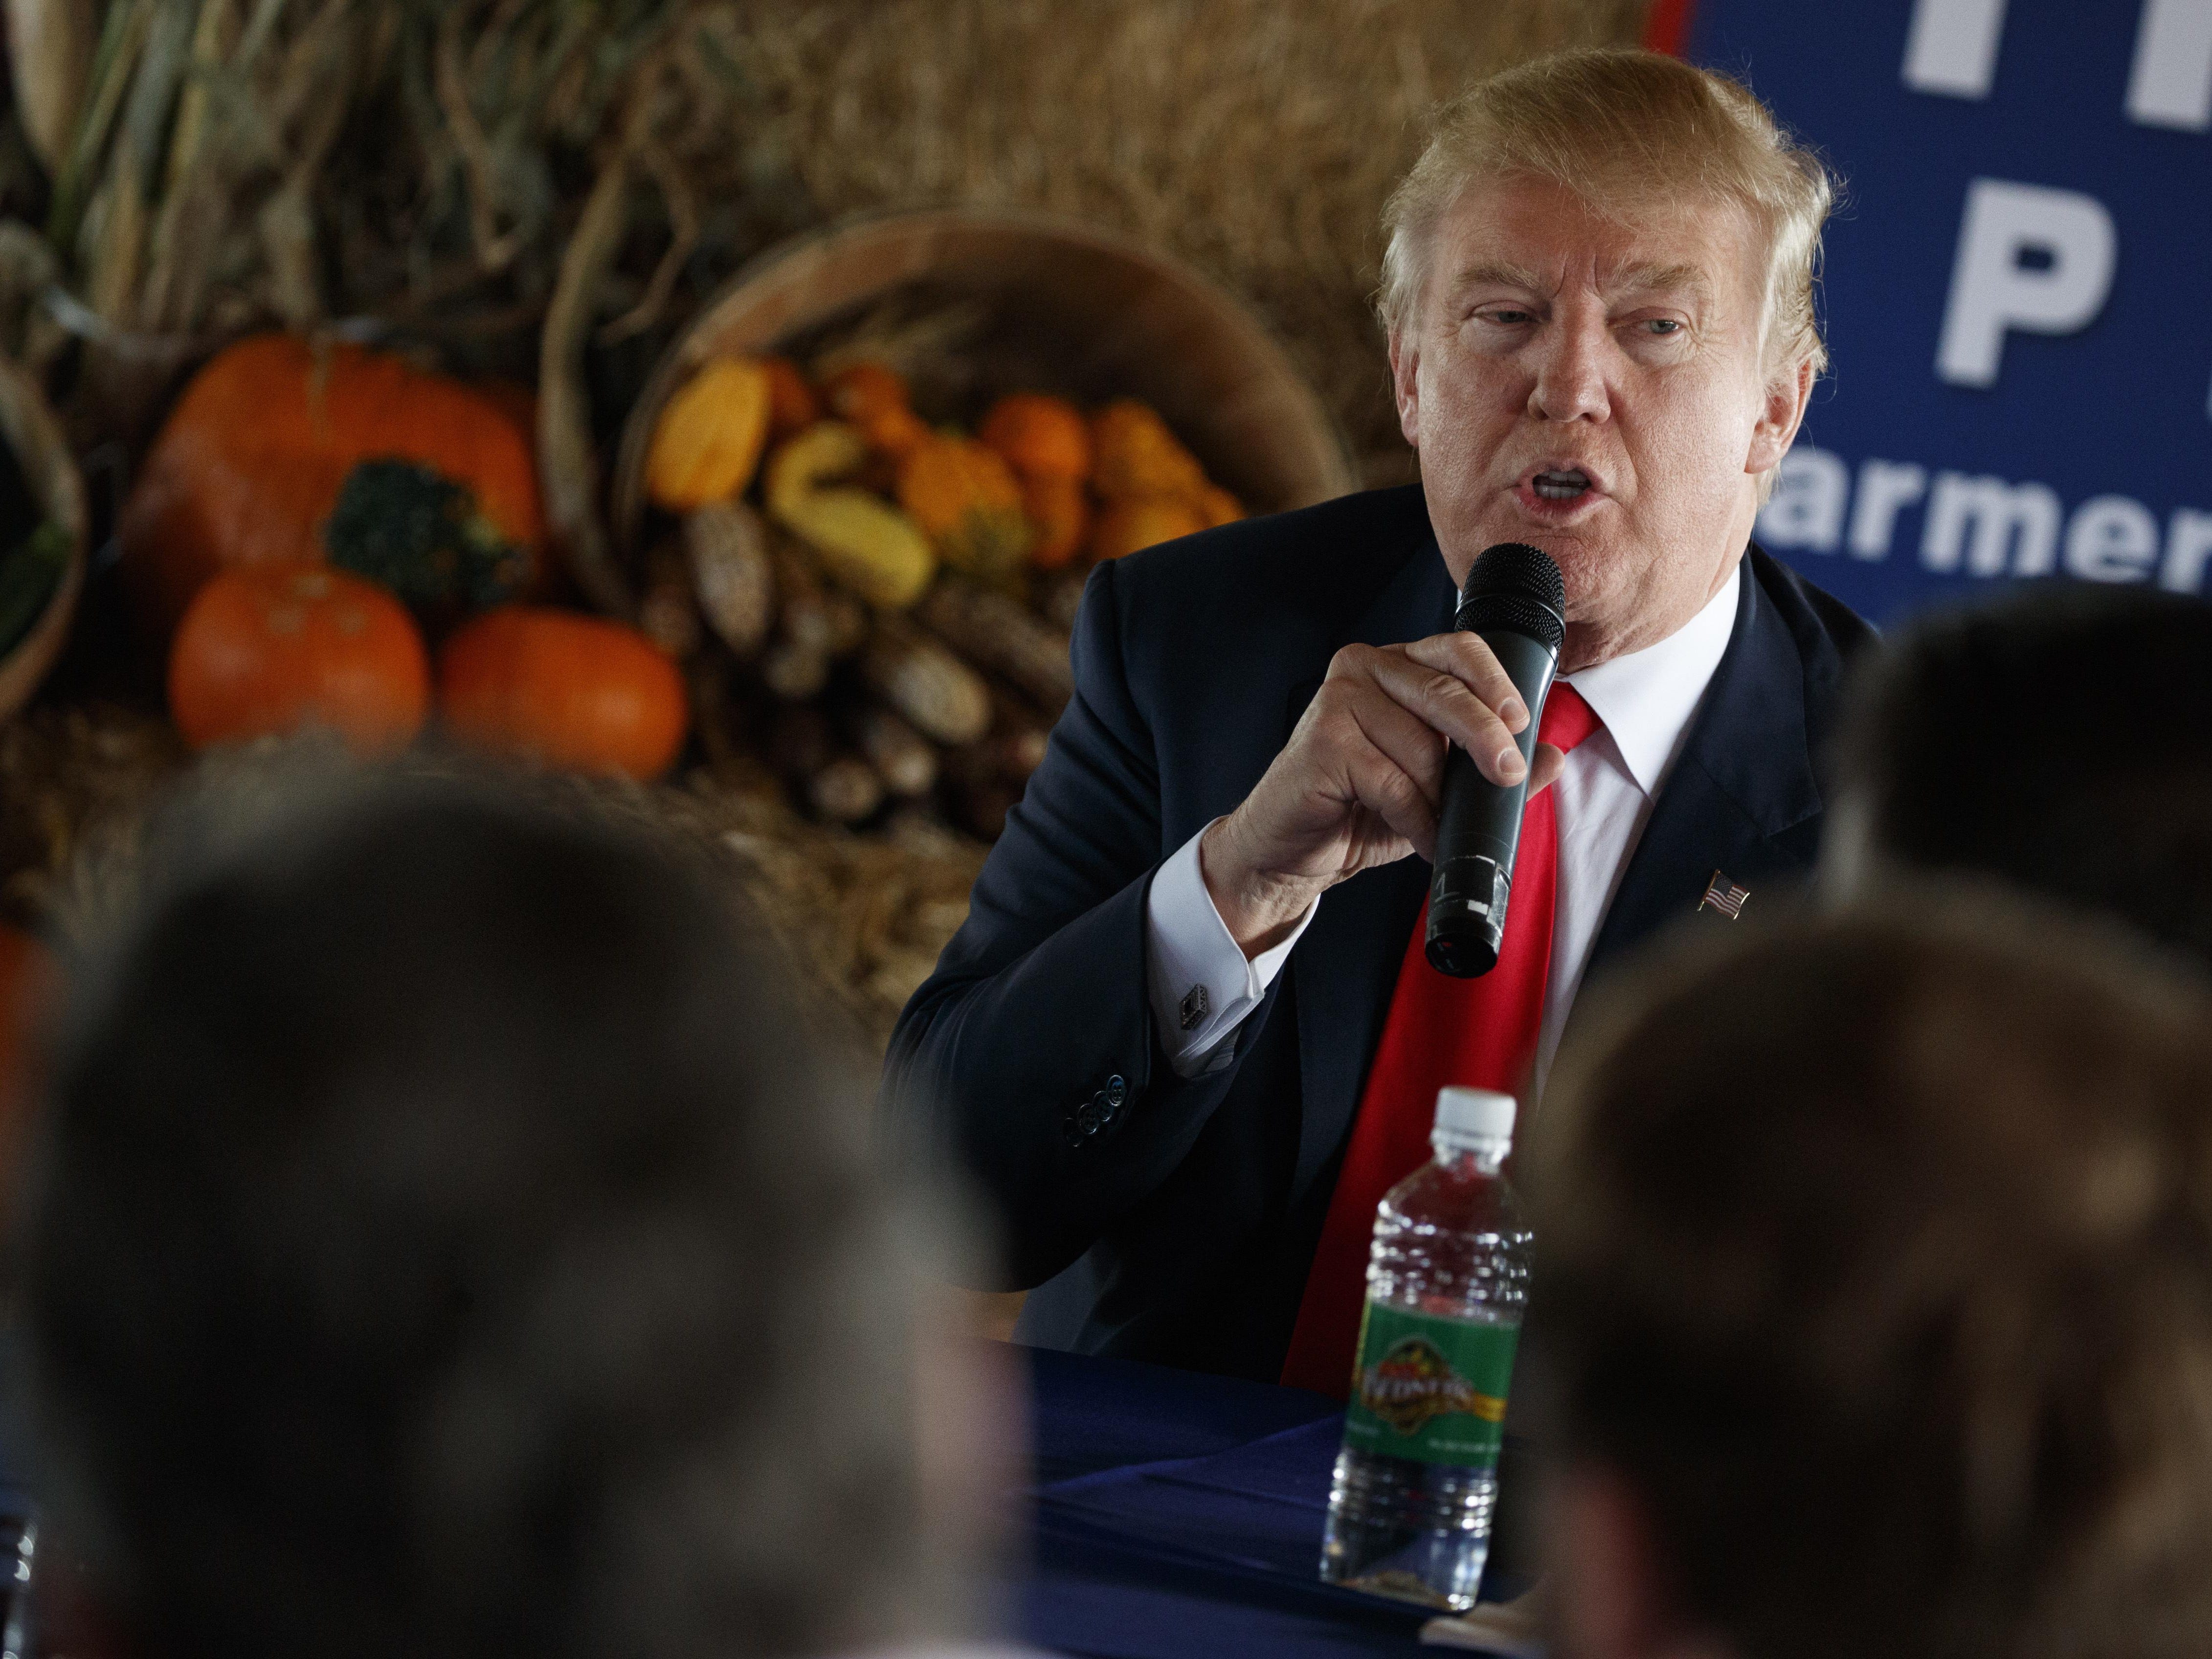 FILE - In this Oct. 24, 2016 file photo, Republican presidential candidate Donald Trump speaks during a meeting with local farmers at Bedners Farm Fresh Market in Boynton Beach, Fla. Florida Gov. Scott may serve as a model and warning for President-e